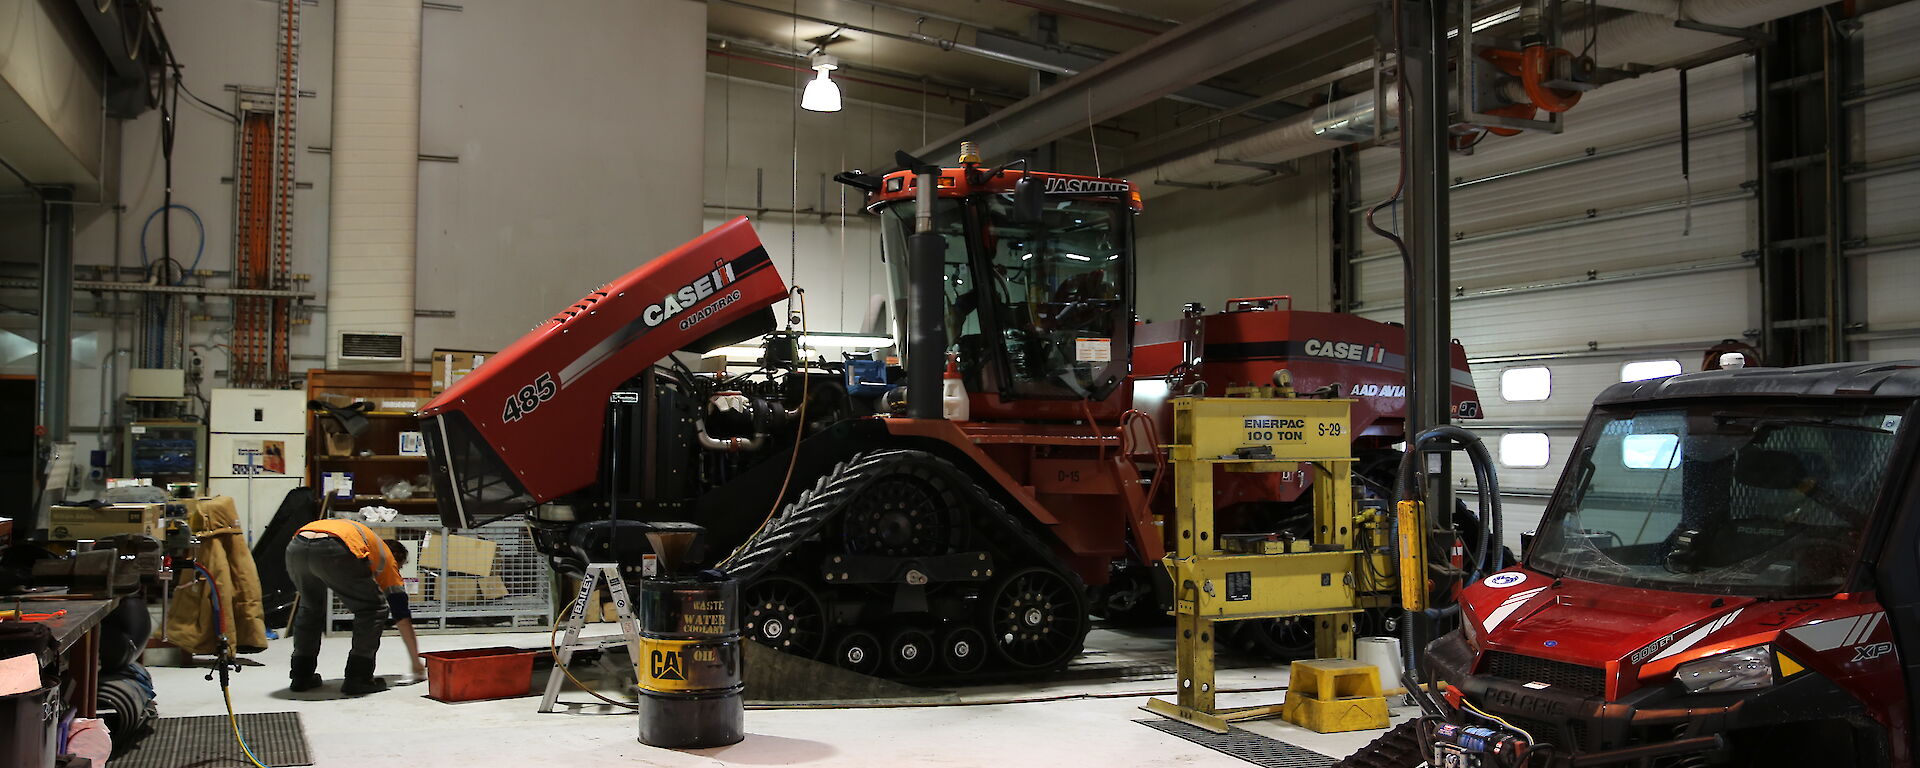 Station mechanical workshop with large tracked vehicles inside a giant shed